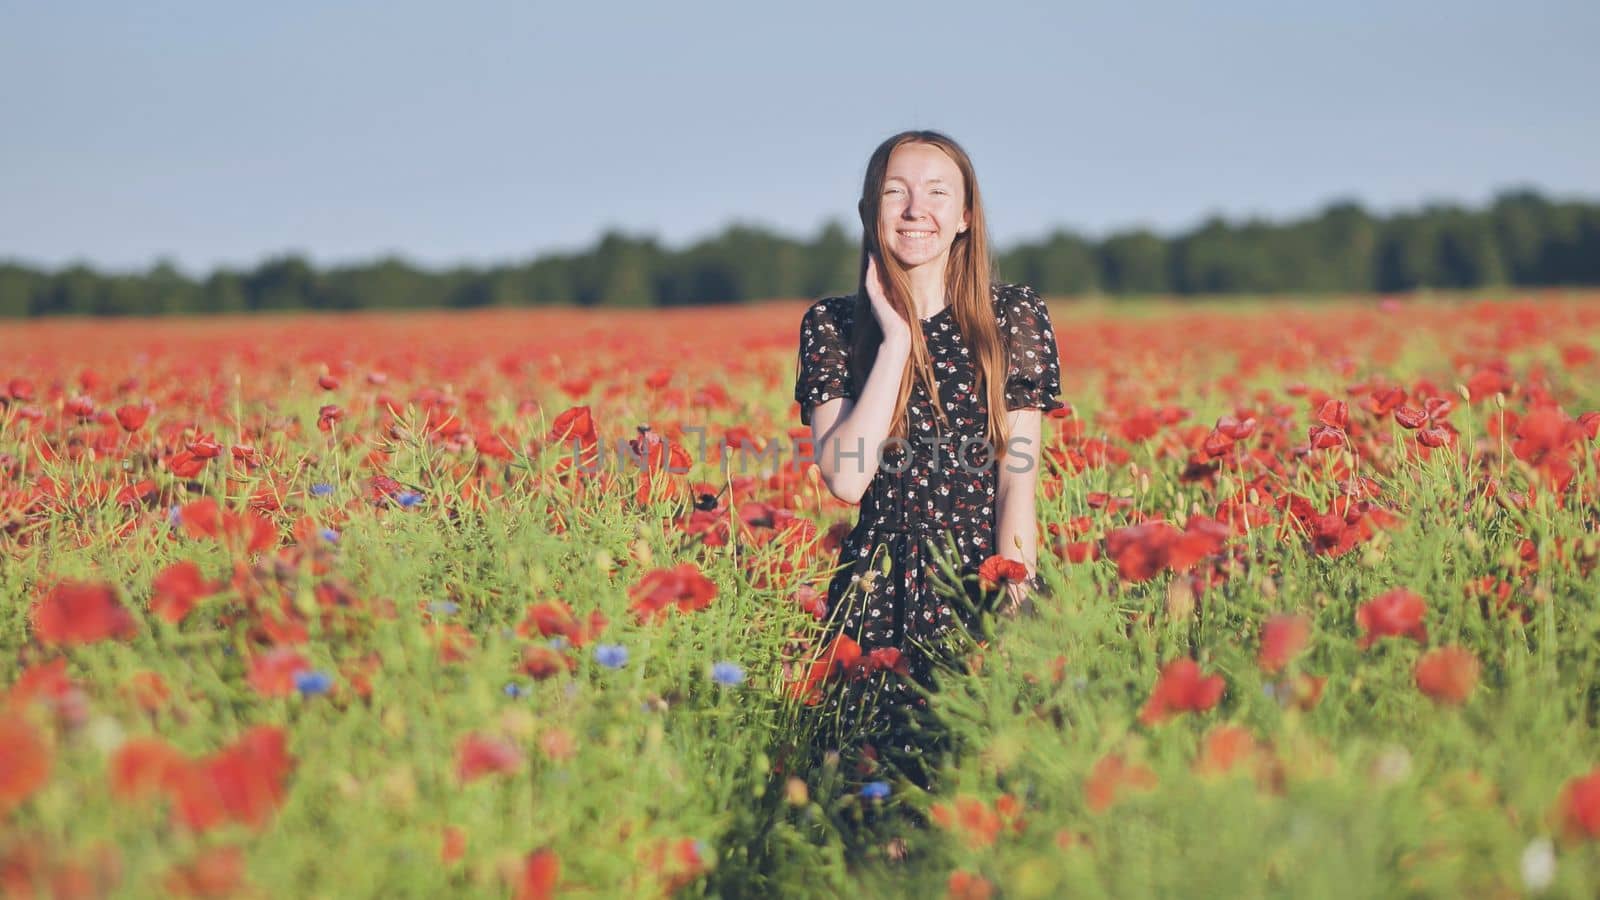 A young girl walks through a red poppy field. by DovidPro